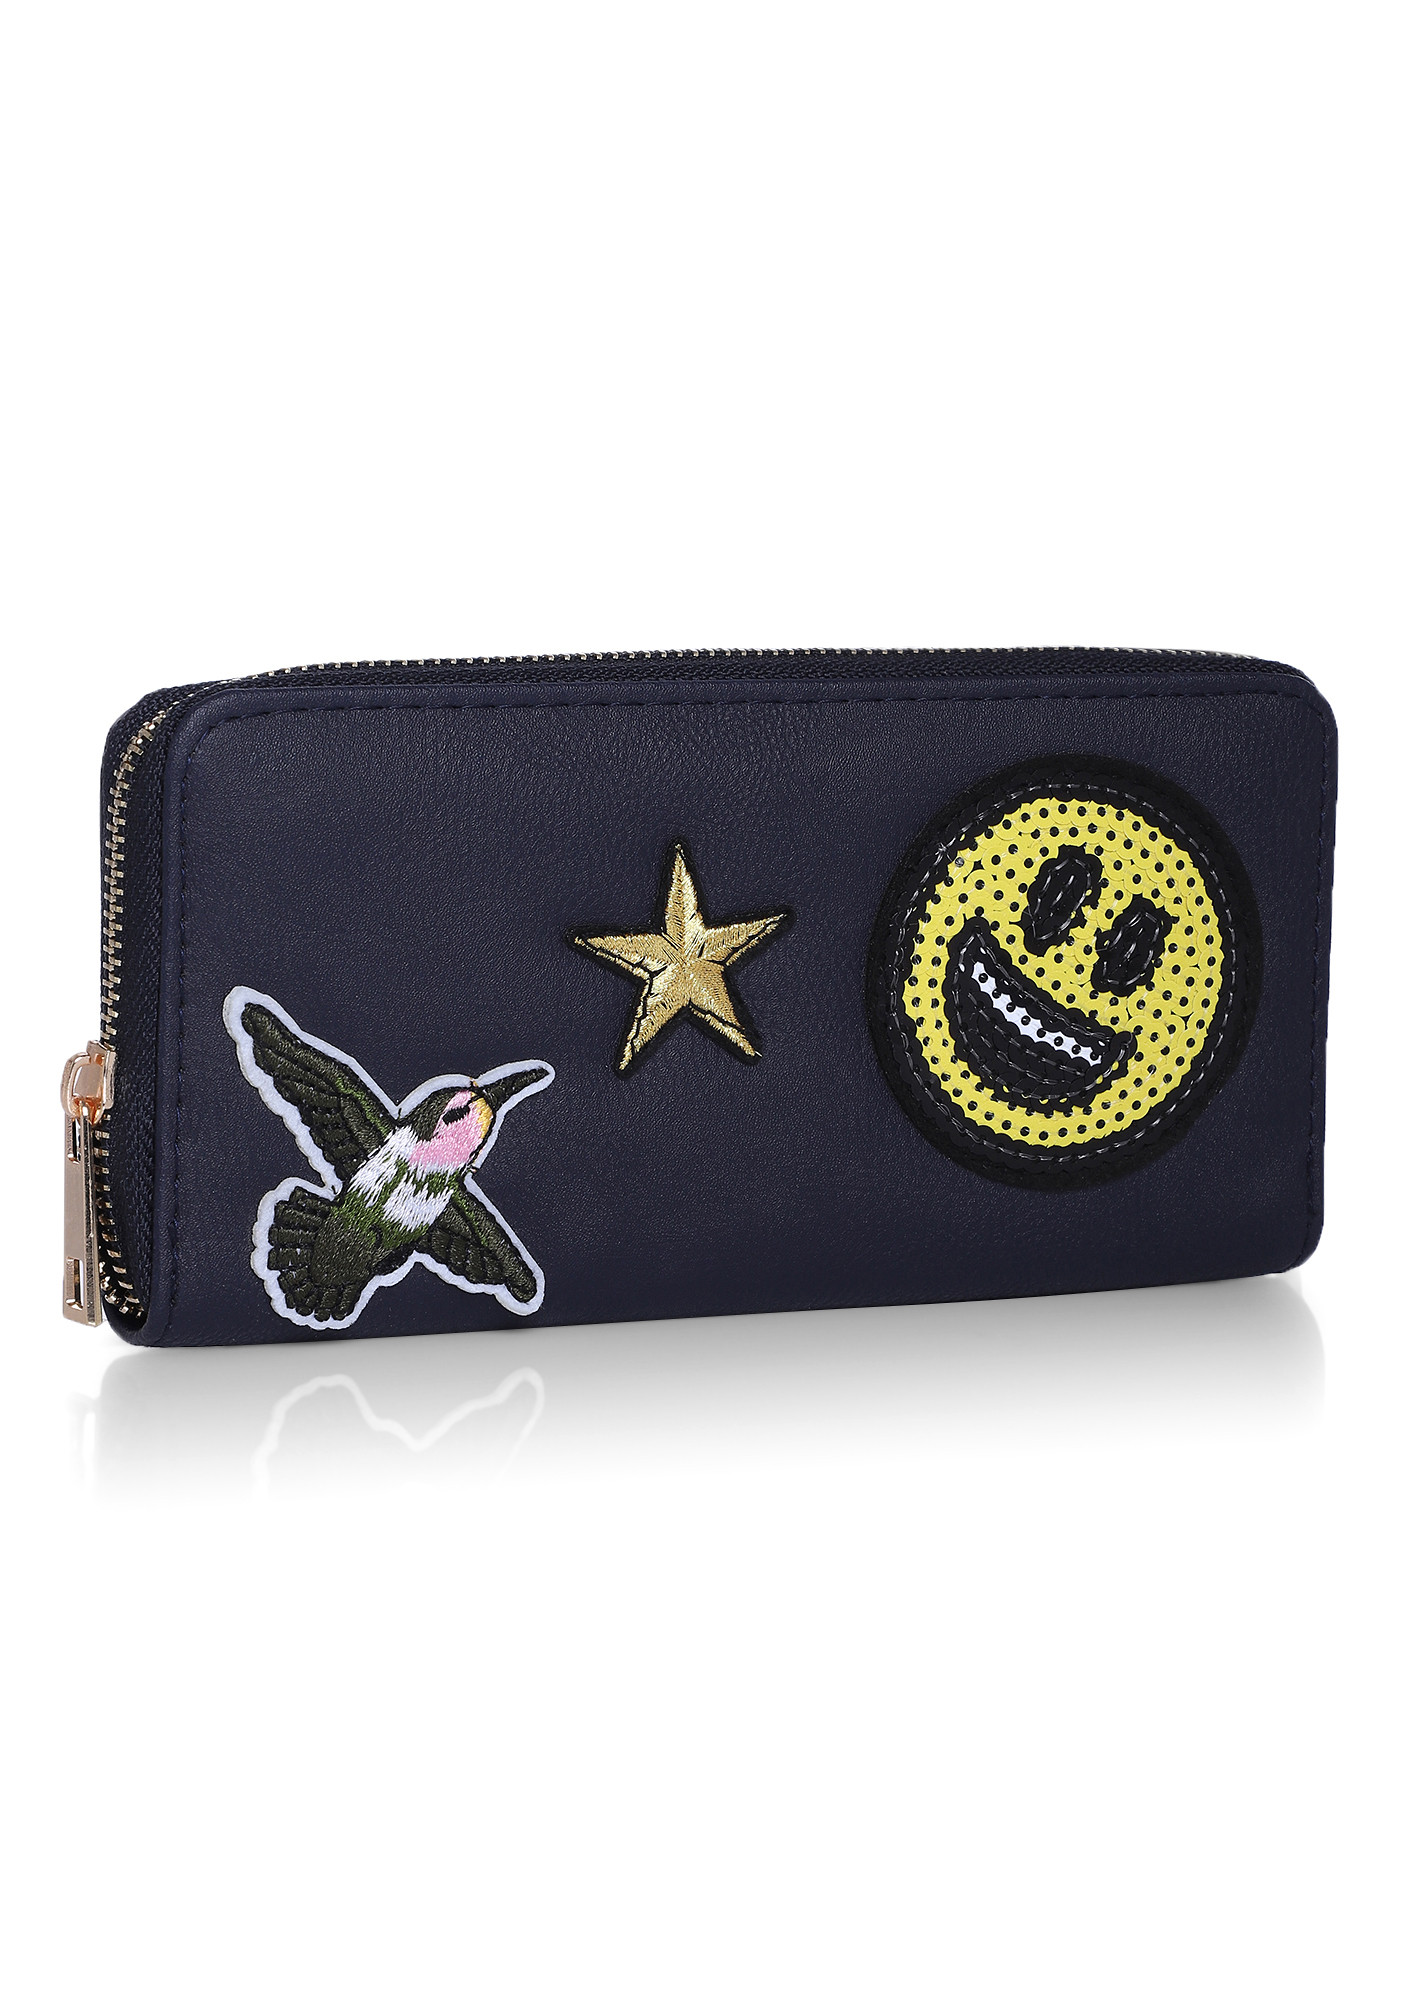 GOING THROUGH A HAPPY PATCH NAVY WALLET